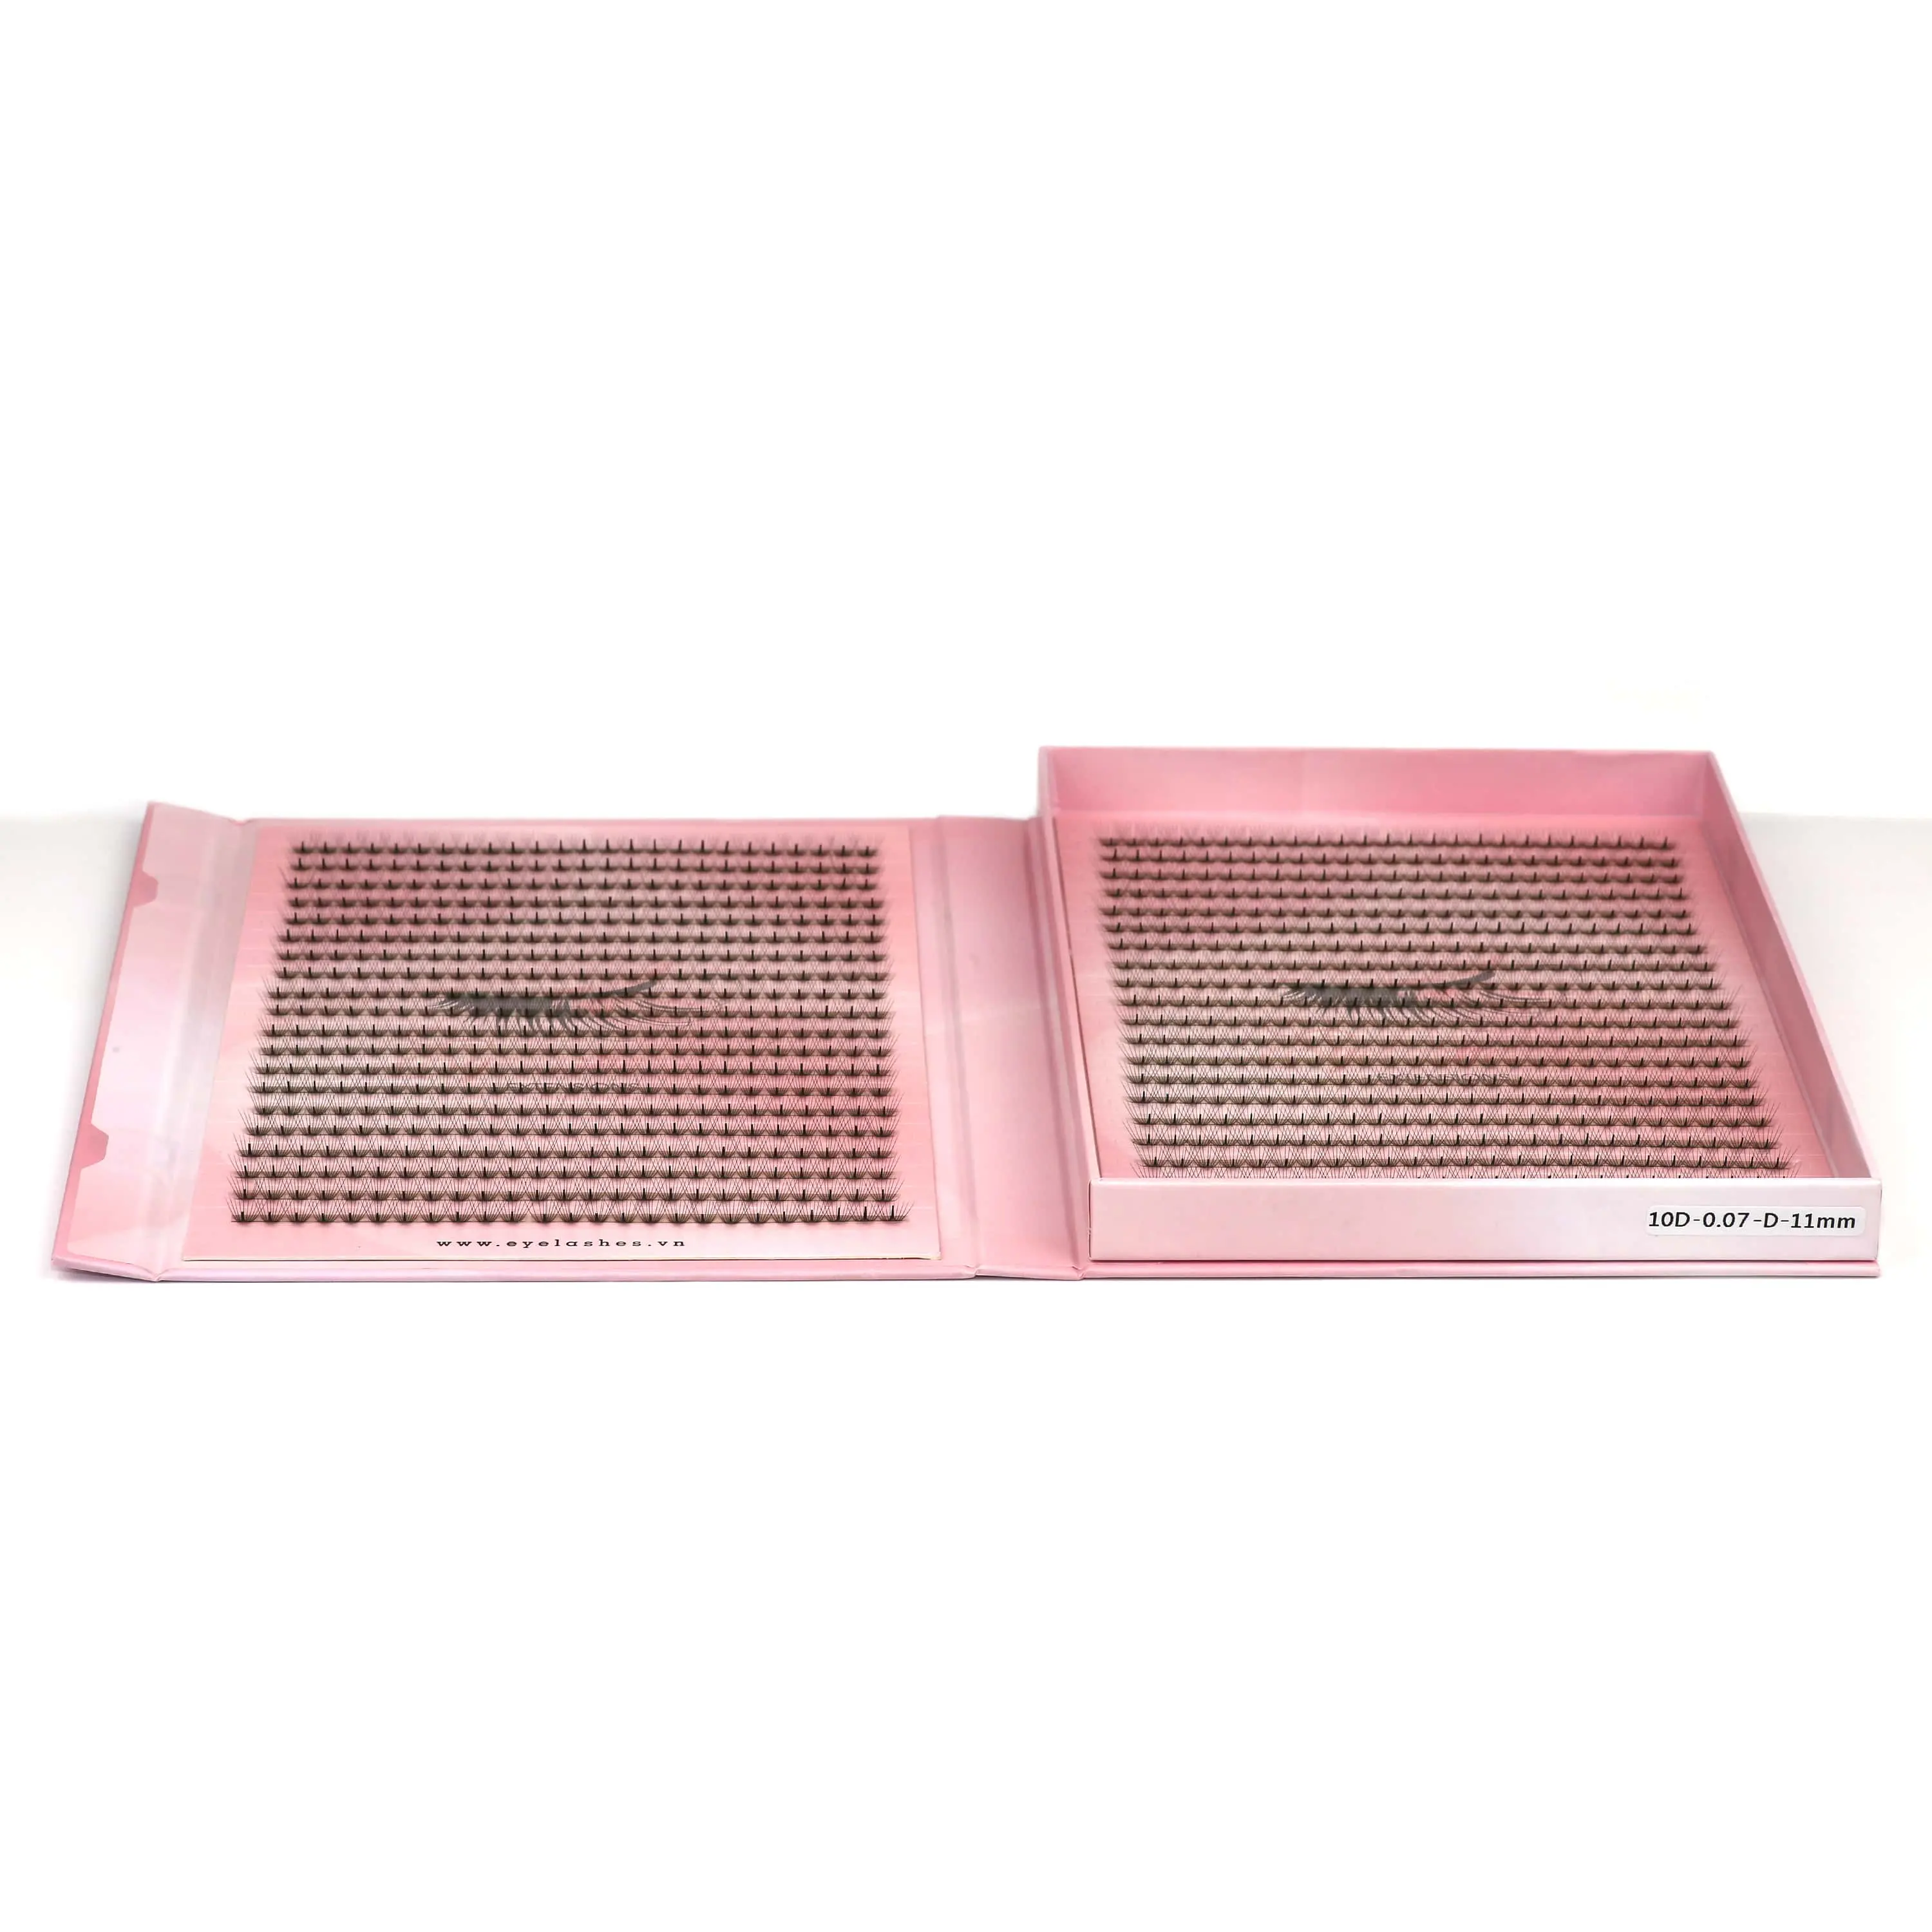 High Quality Individual Eyelash Extensions Promade 10D40LINE1000Fans Lashes Eyelash Extensions From Vietnam Wholesaler VNLASHES